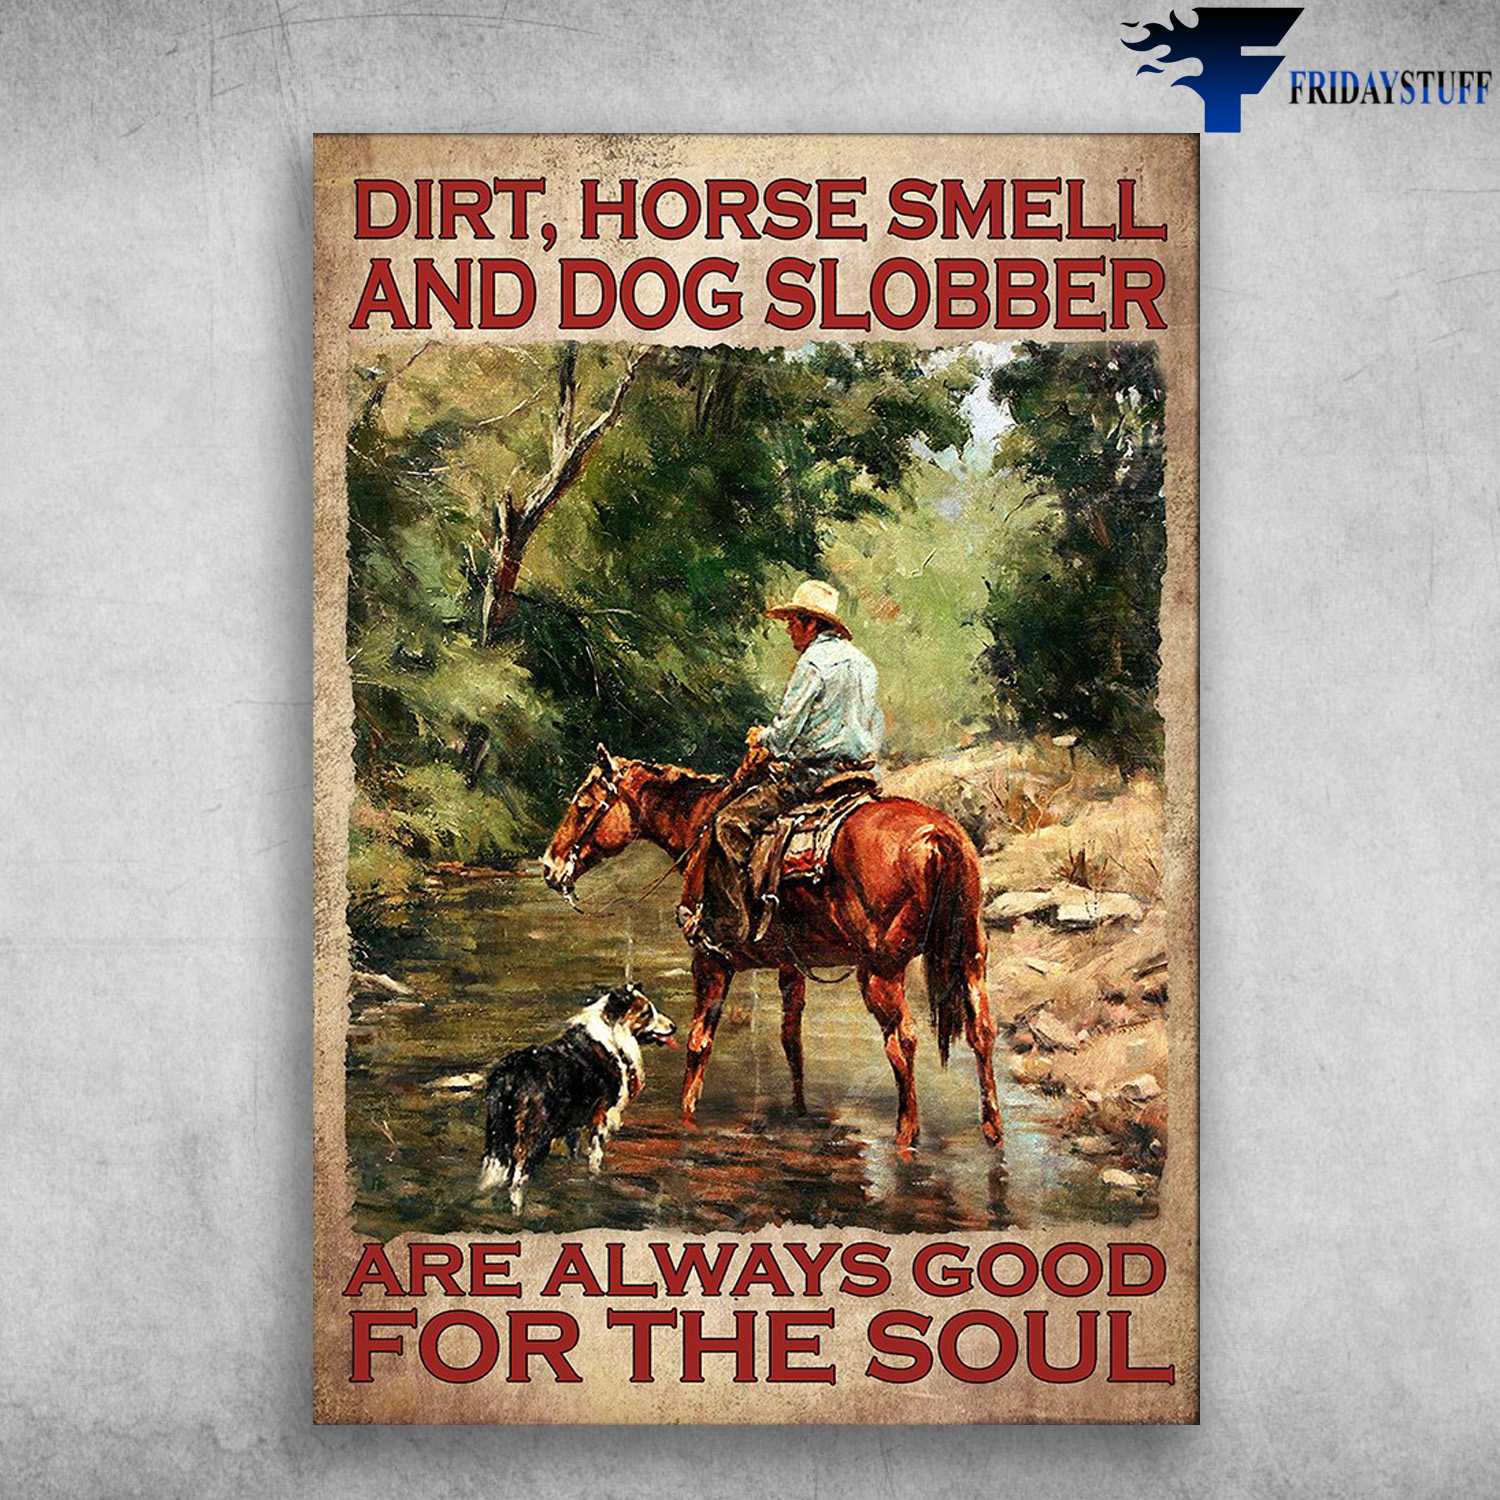 Man Riding Horse - Dirt, Horse Smell, And Dog Slobber, Are Always Good, For The SoulMan Riding Horse - Dirt, Horse Smell, And Dog Slobber, Are Always Good, For The Soul